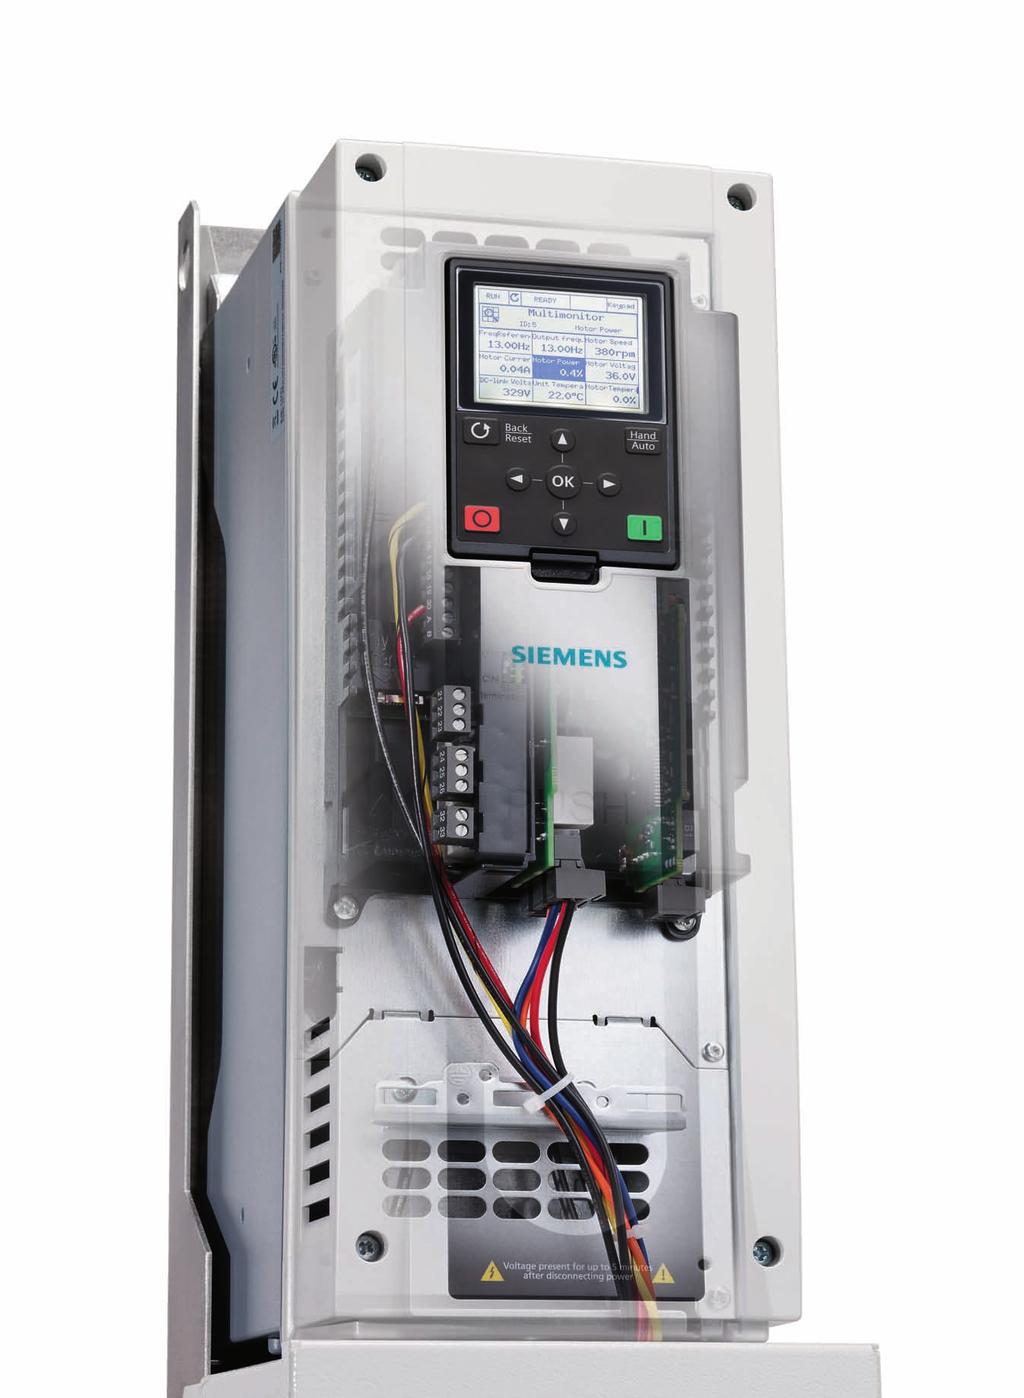 Two PID Controllers Achieve fast and accurate pressure control.